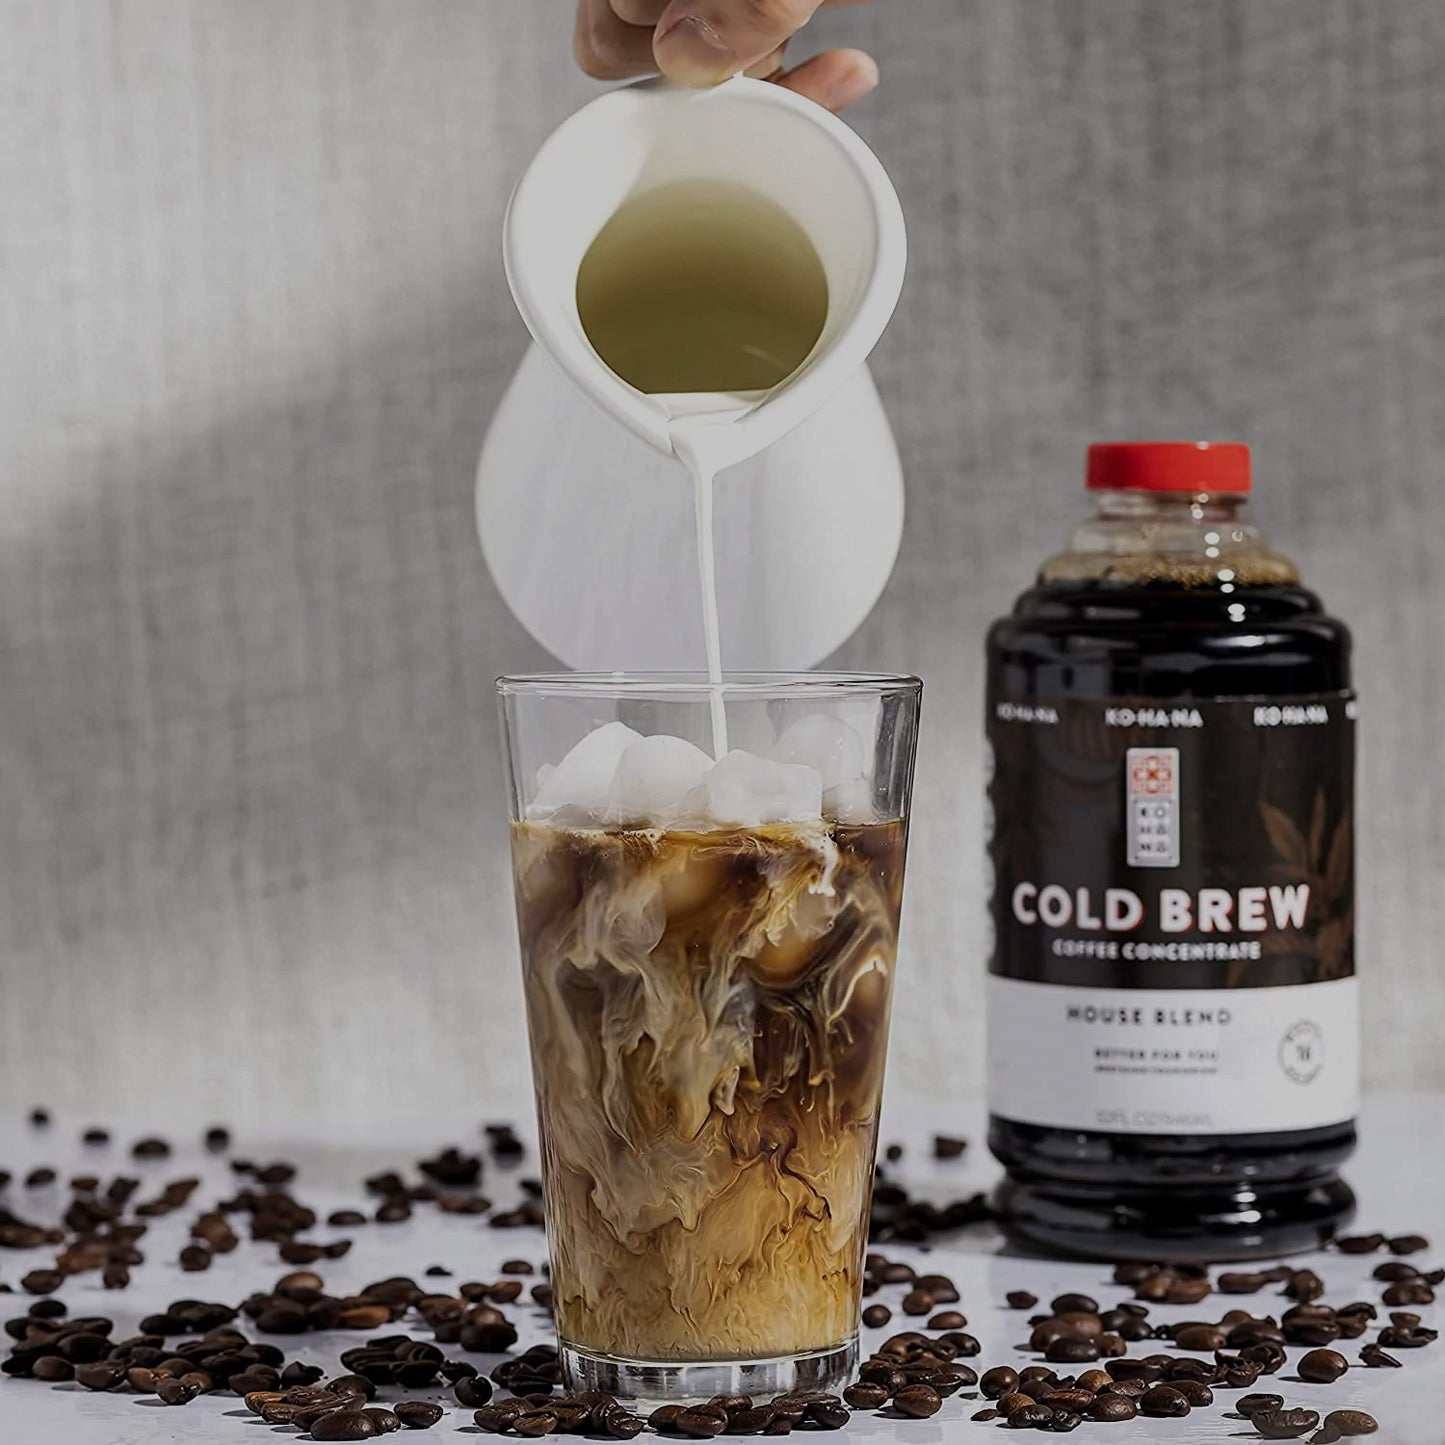 START YOUR OWN COLD BREW COFFEE BUSINESS 